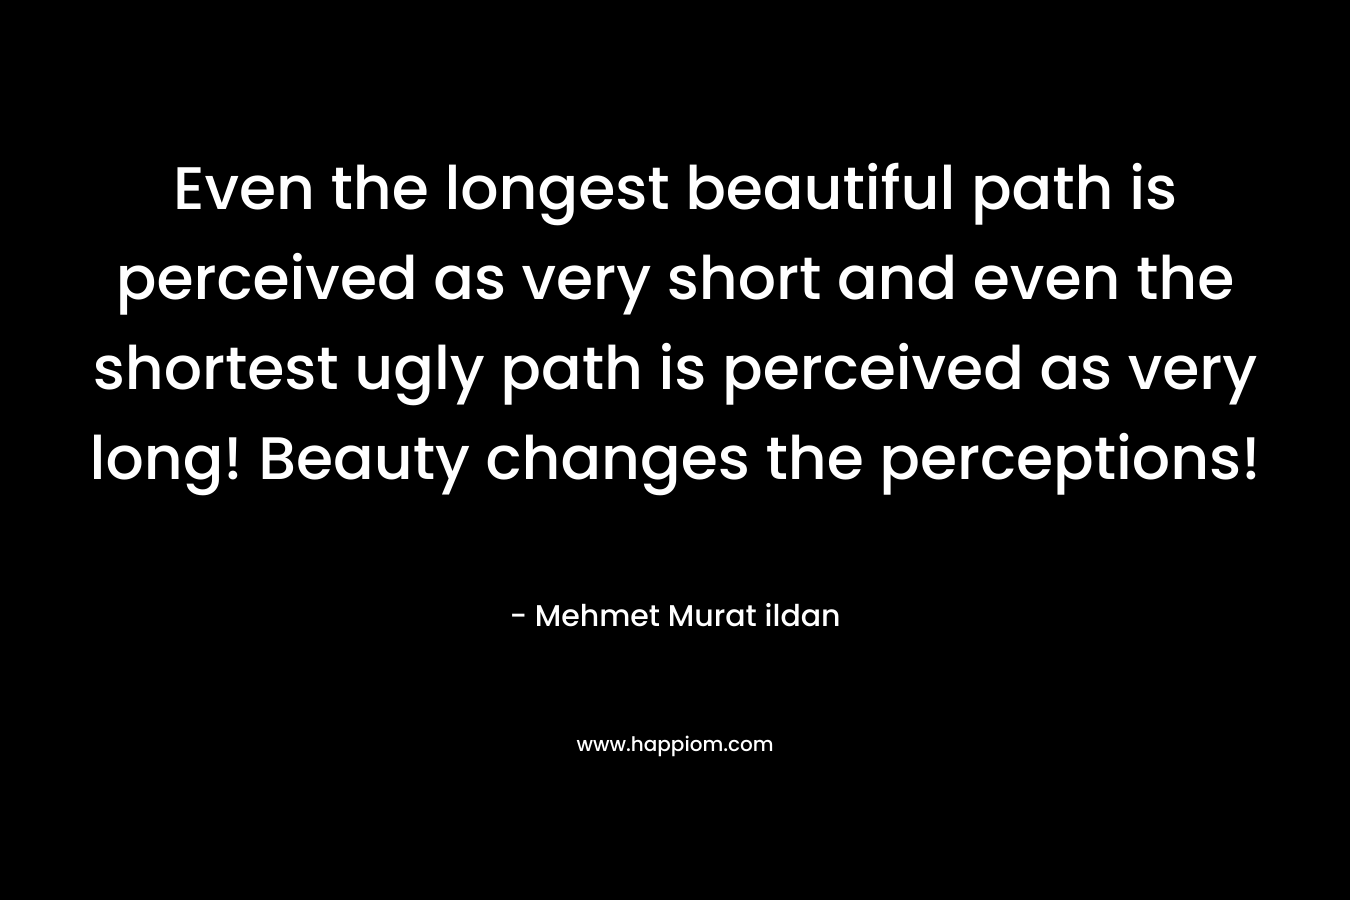 Even the longest beautiful path is perceived as very short and even the shortest ugly path is perceived as very long! Beauty changes the perceptions! – Mehmet Murat ildan